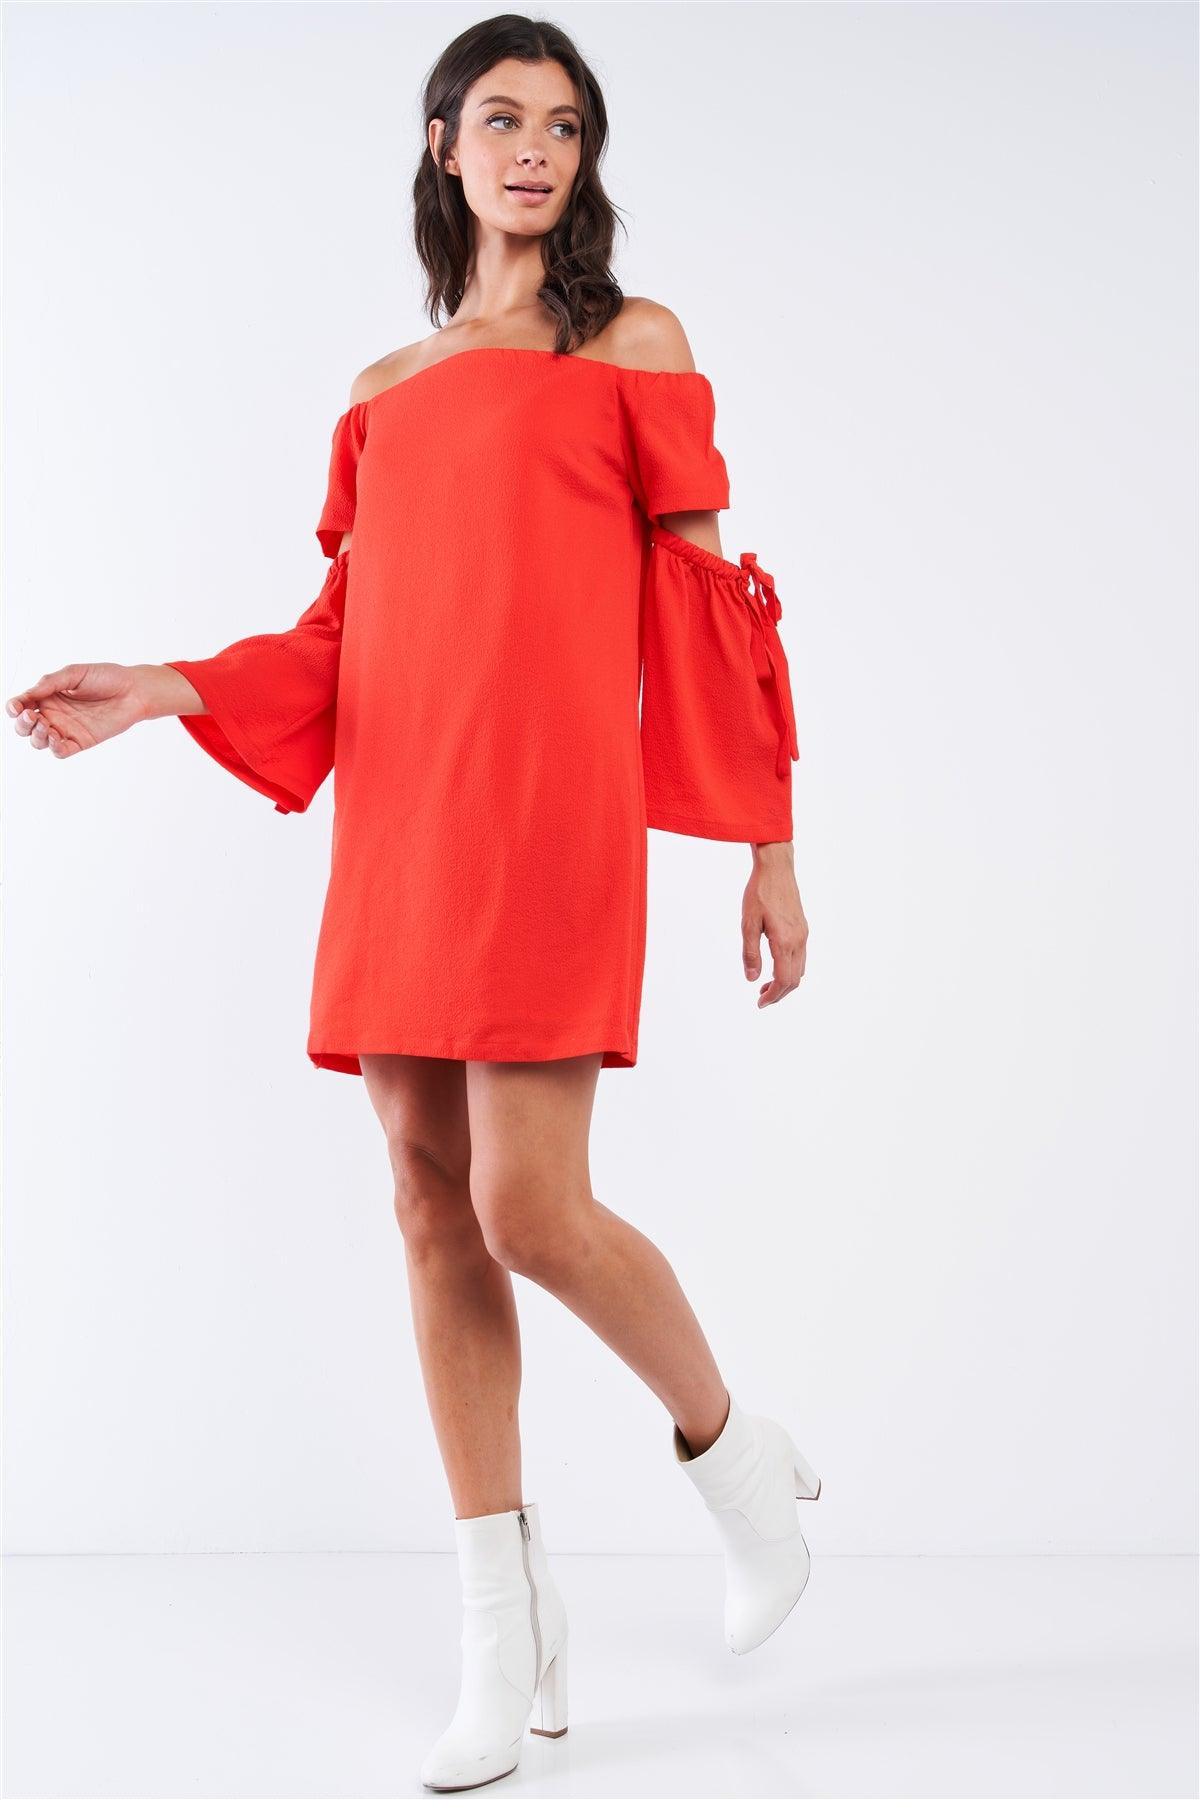 Coral Red Off-The-Shoulder Relaxed Fit Cut Out Bell Sleeve With Elastic Ribbon Tie Mini Dress /1-2-2-1